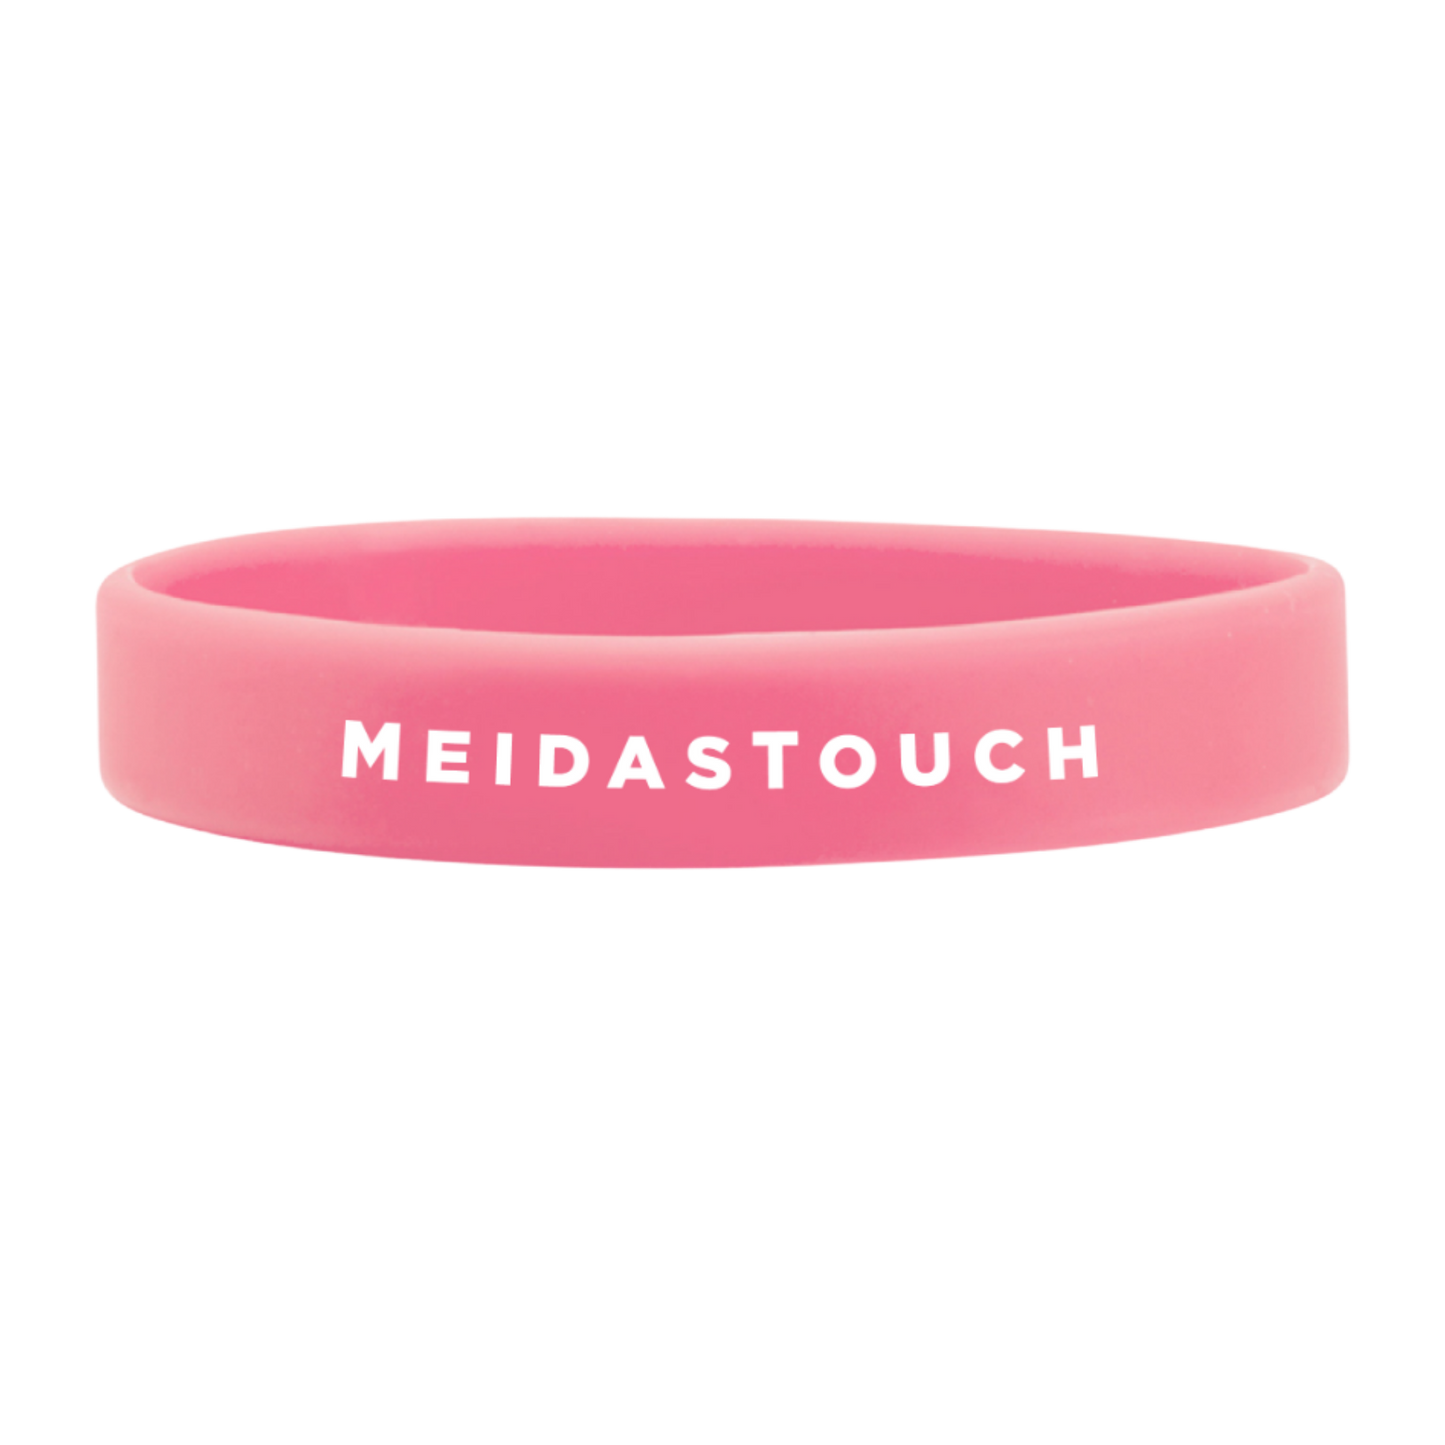 Truth is Golden Pink Wristband